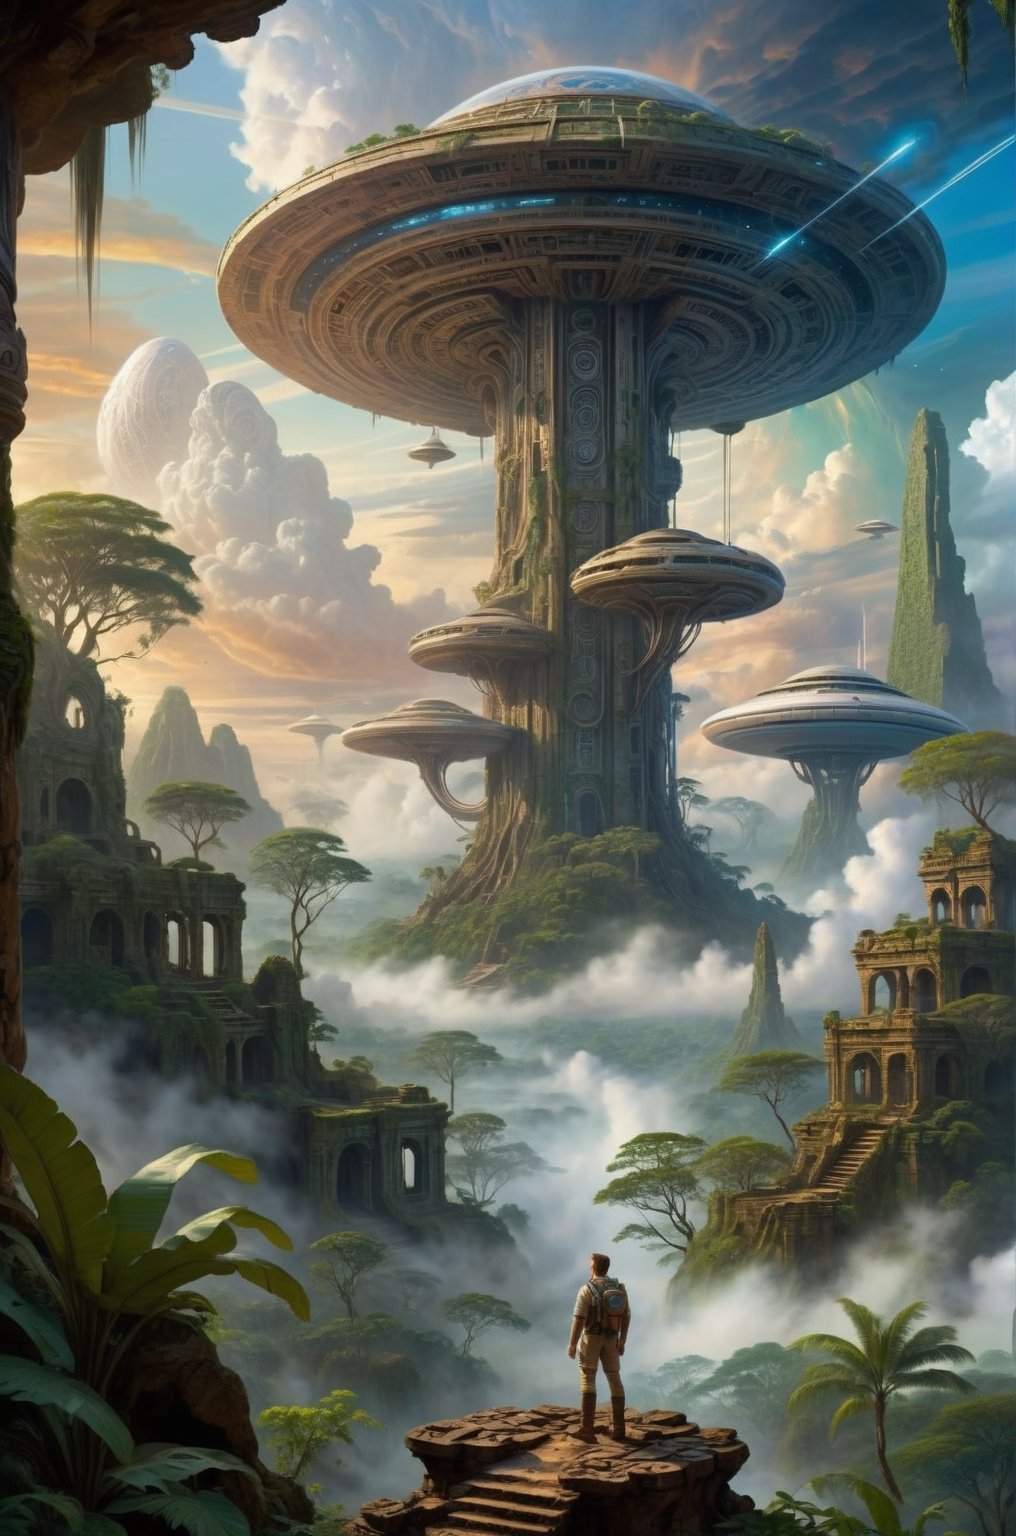 masterpiece, highly detailed, In the heart of the jungle amidst the remnants of a bygone era, the explorer stands amidst the Alien Ruins, he expression a blend of wonder and determination as he contemplates the intersection of Science Fiction and reality, the swirling clouds overhead a symbol of the turbulent journey that lies ahead, Intense contrasts, surreal